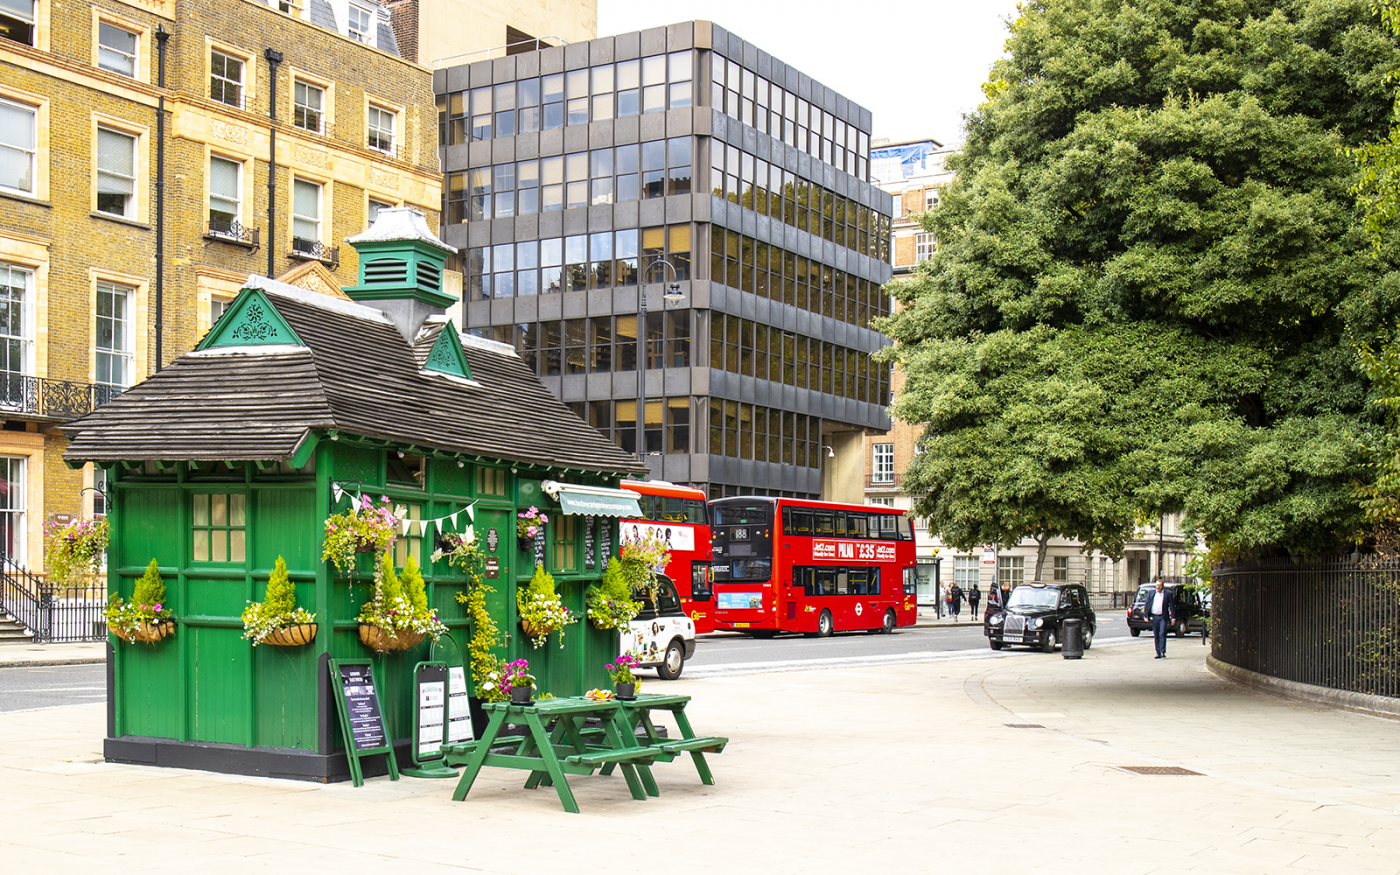 The Little Green Hut café in Russell Square. One of the few surviving Victorian-era Cabmen's Shelters. Black Cabs, red busses and the UCL Institute of Education.